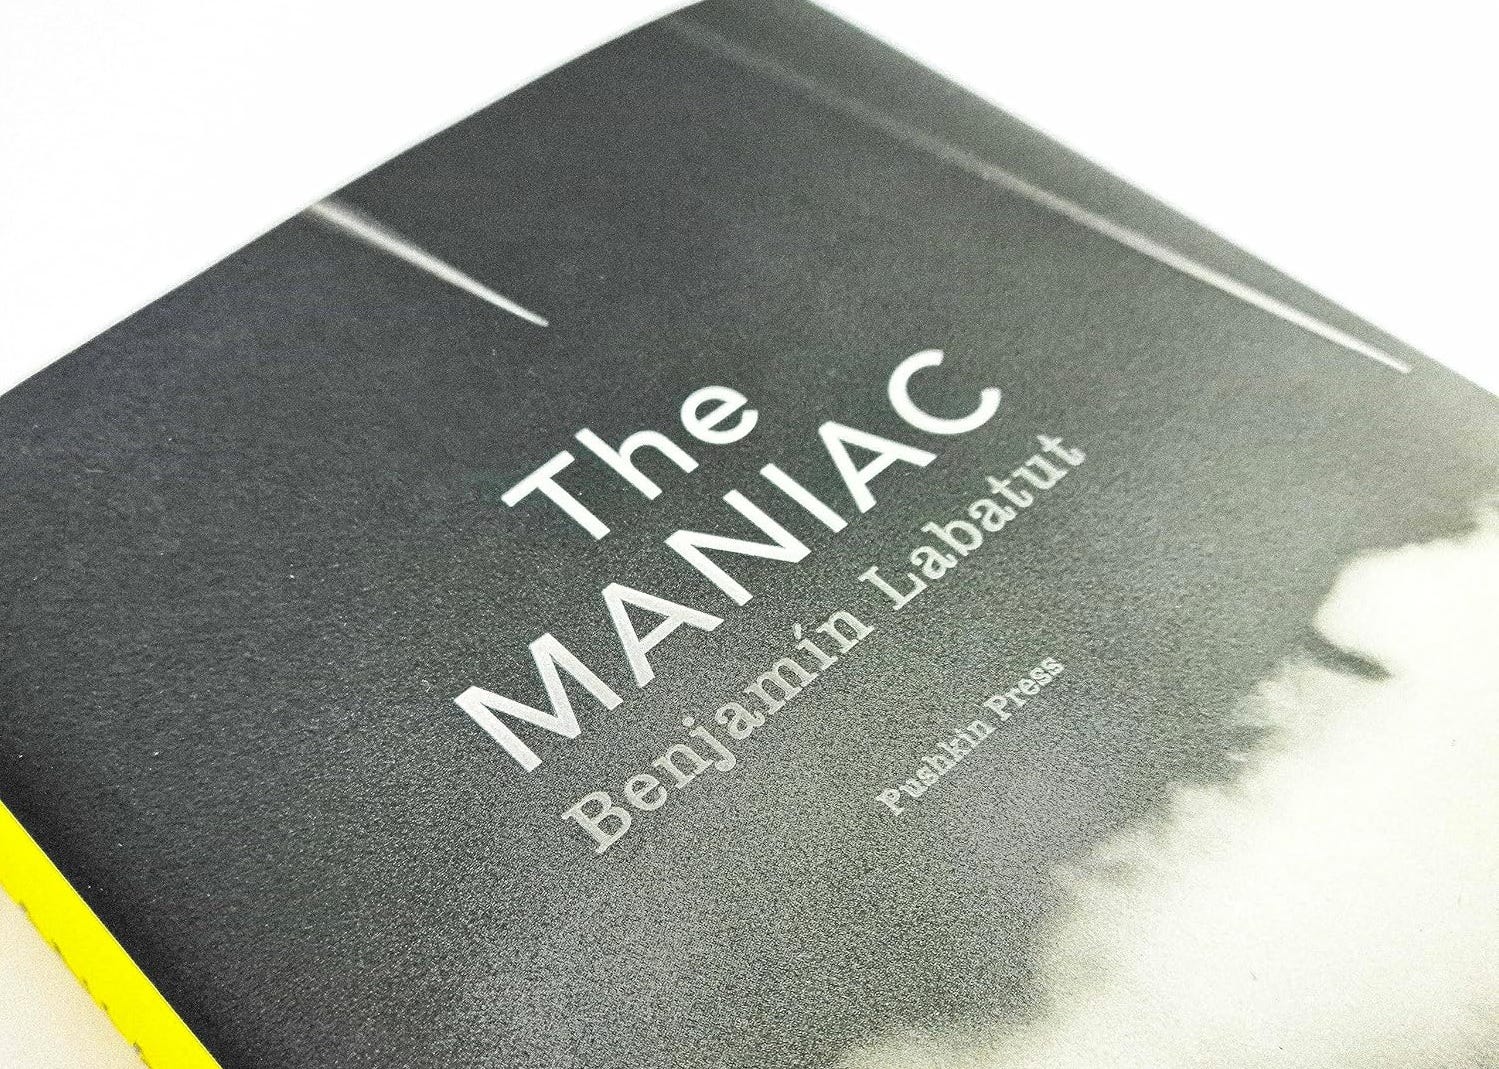 Sun Bookshop on Instagram: Kat loved Benjamín Labatut's novel THE MANIAC -  an eagerly awaited novel after his equally brilliant genre and form bending  WHEN WE CEASE TO UNDERSTAND THE WORLD.⁠ ⁠